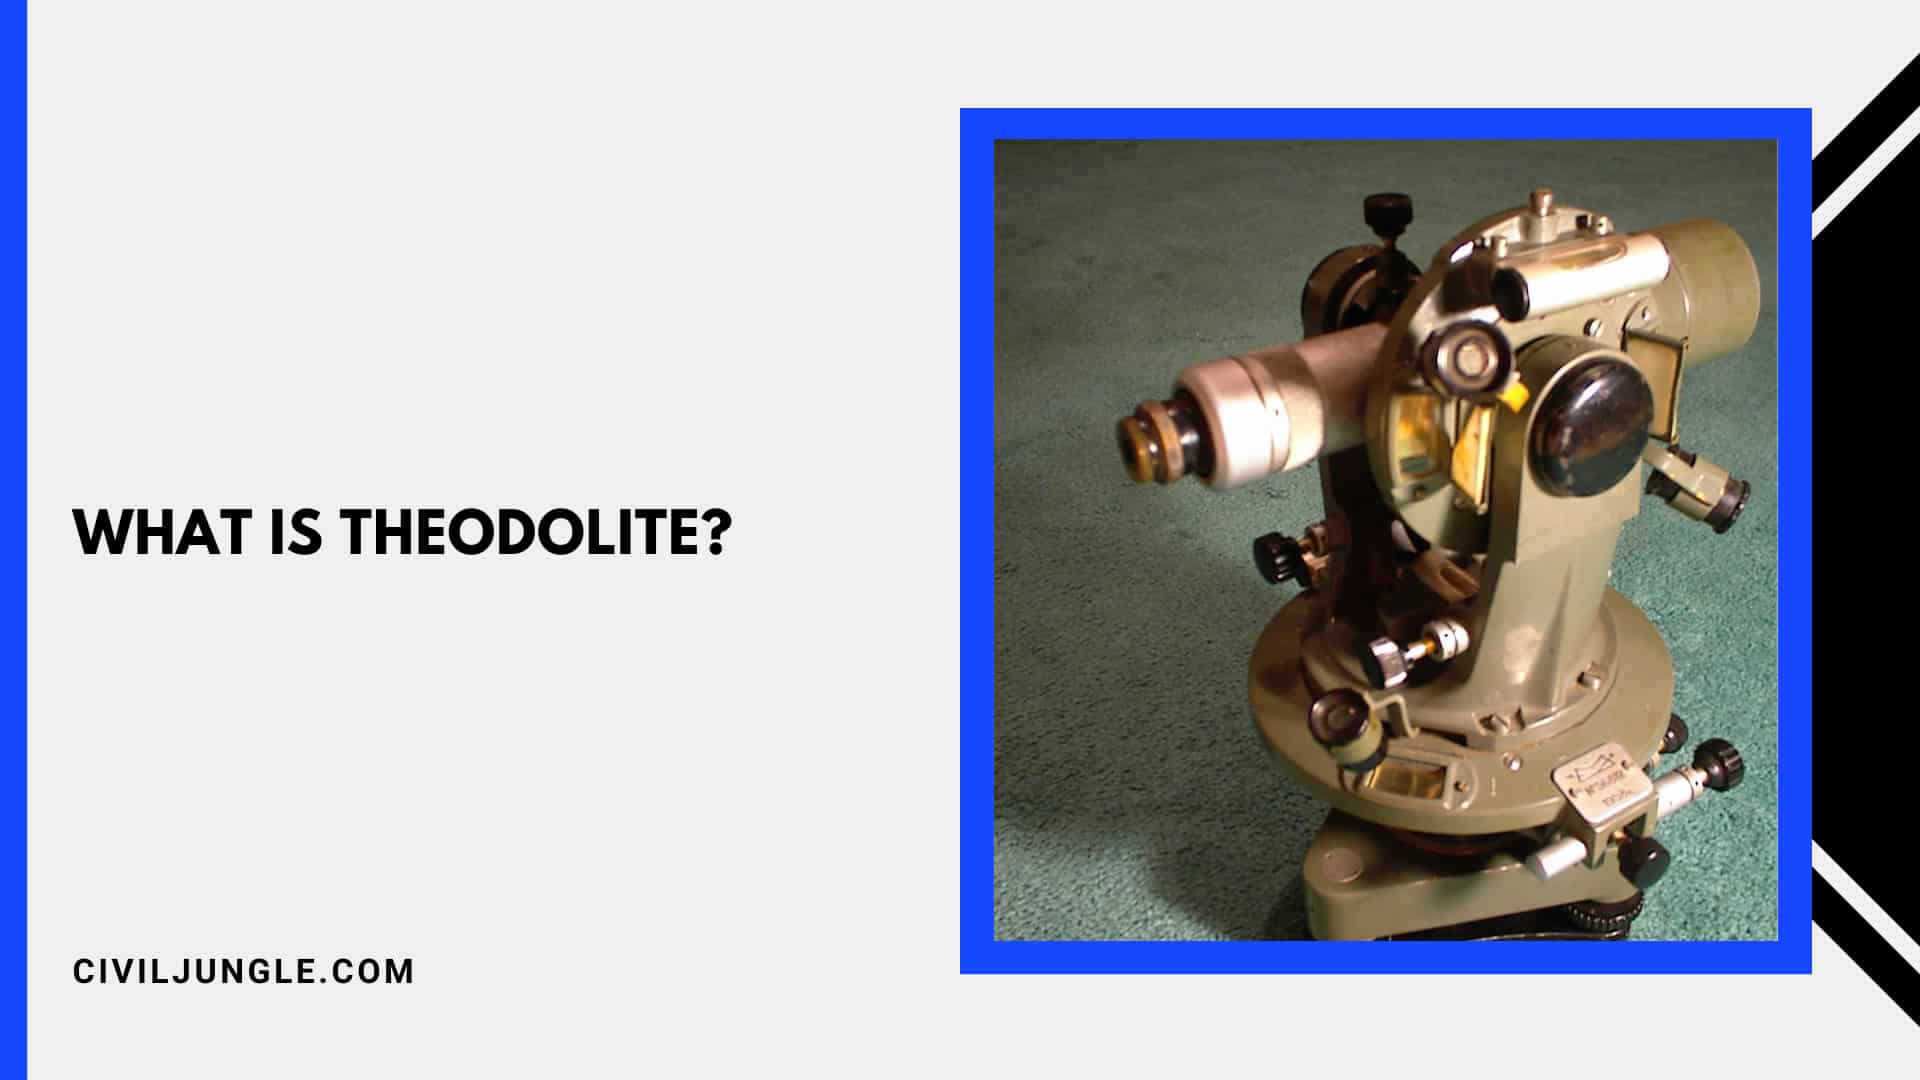 What Is Theodolite?